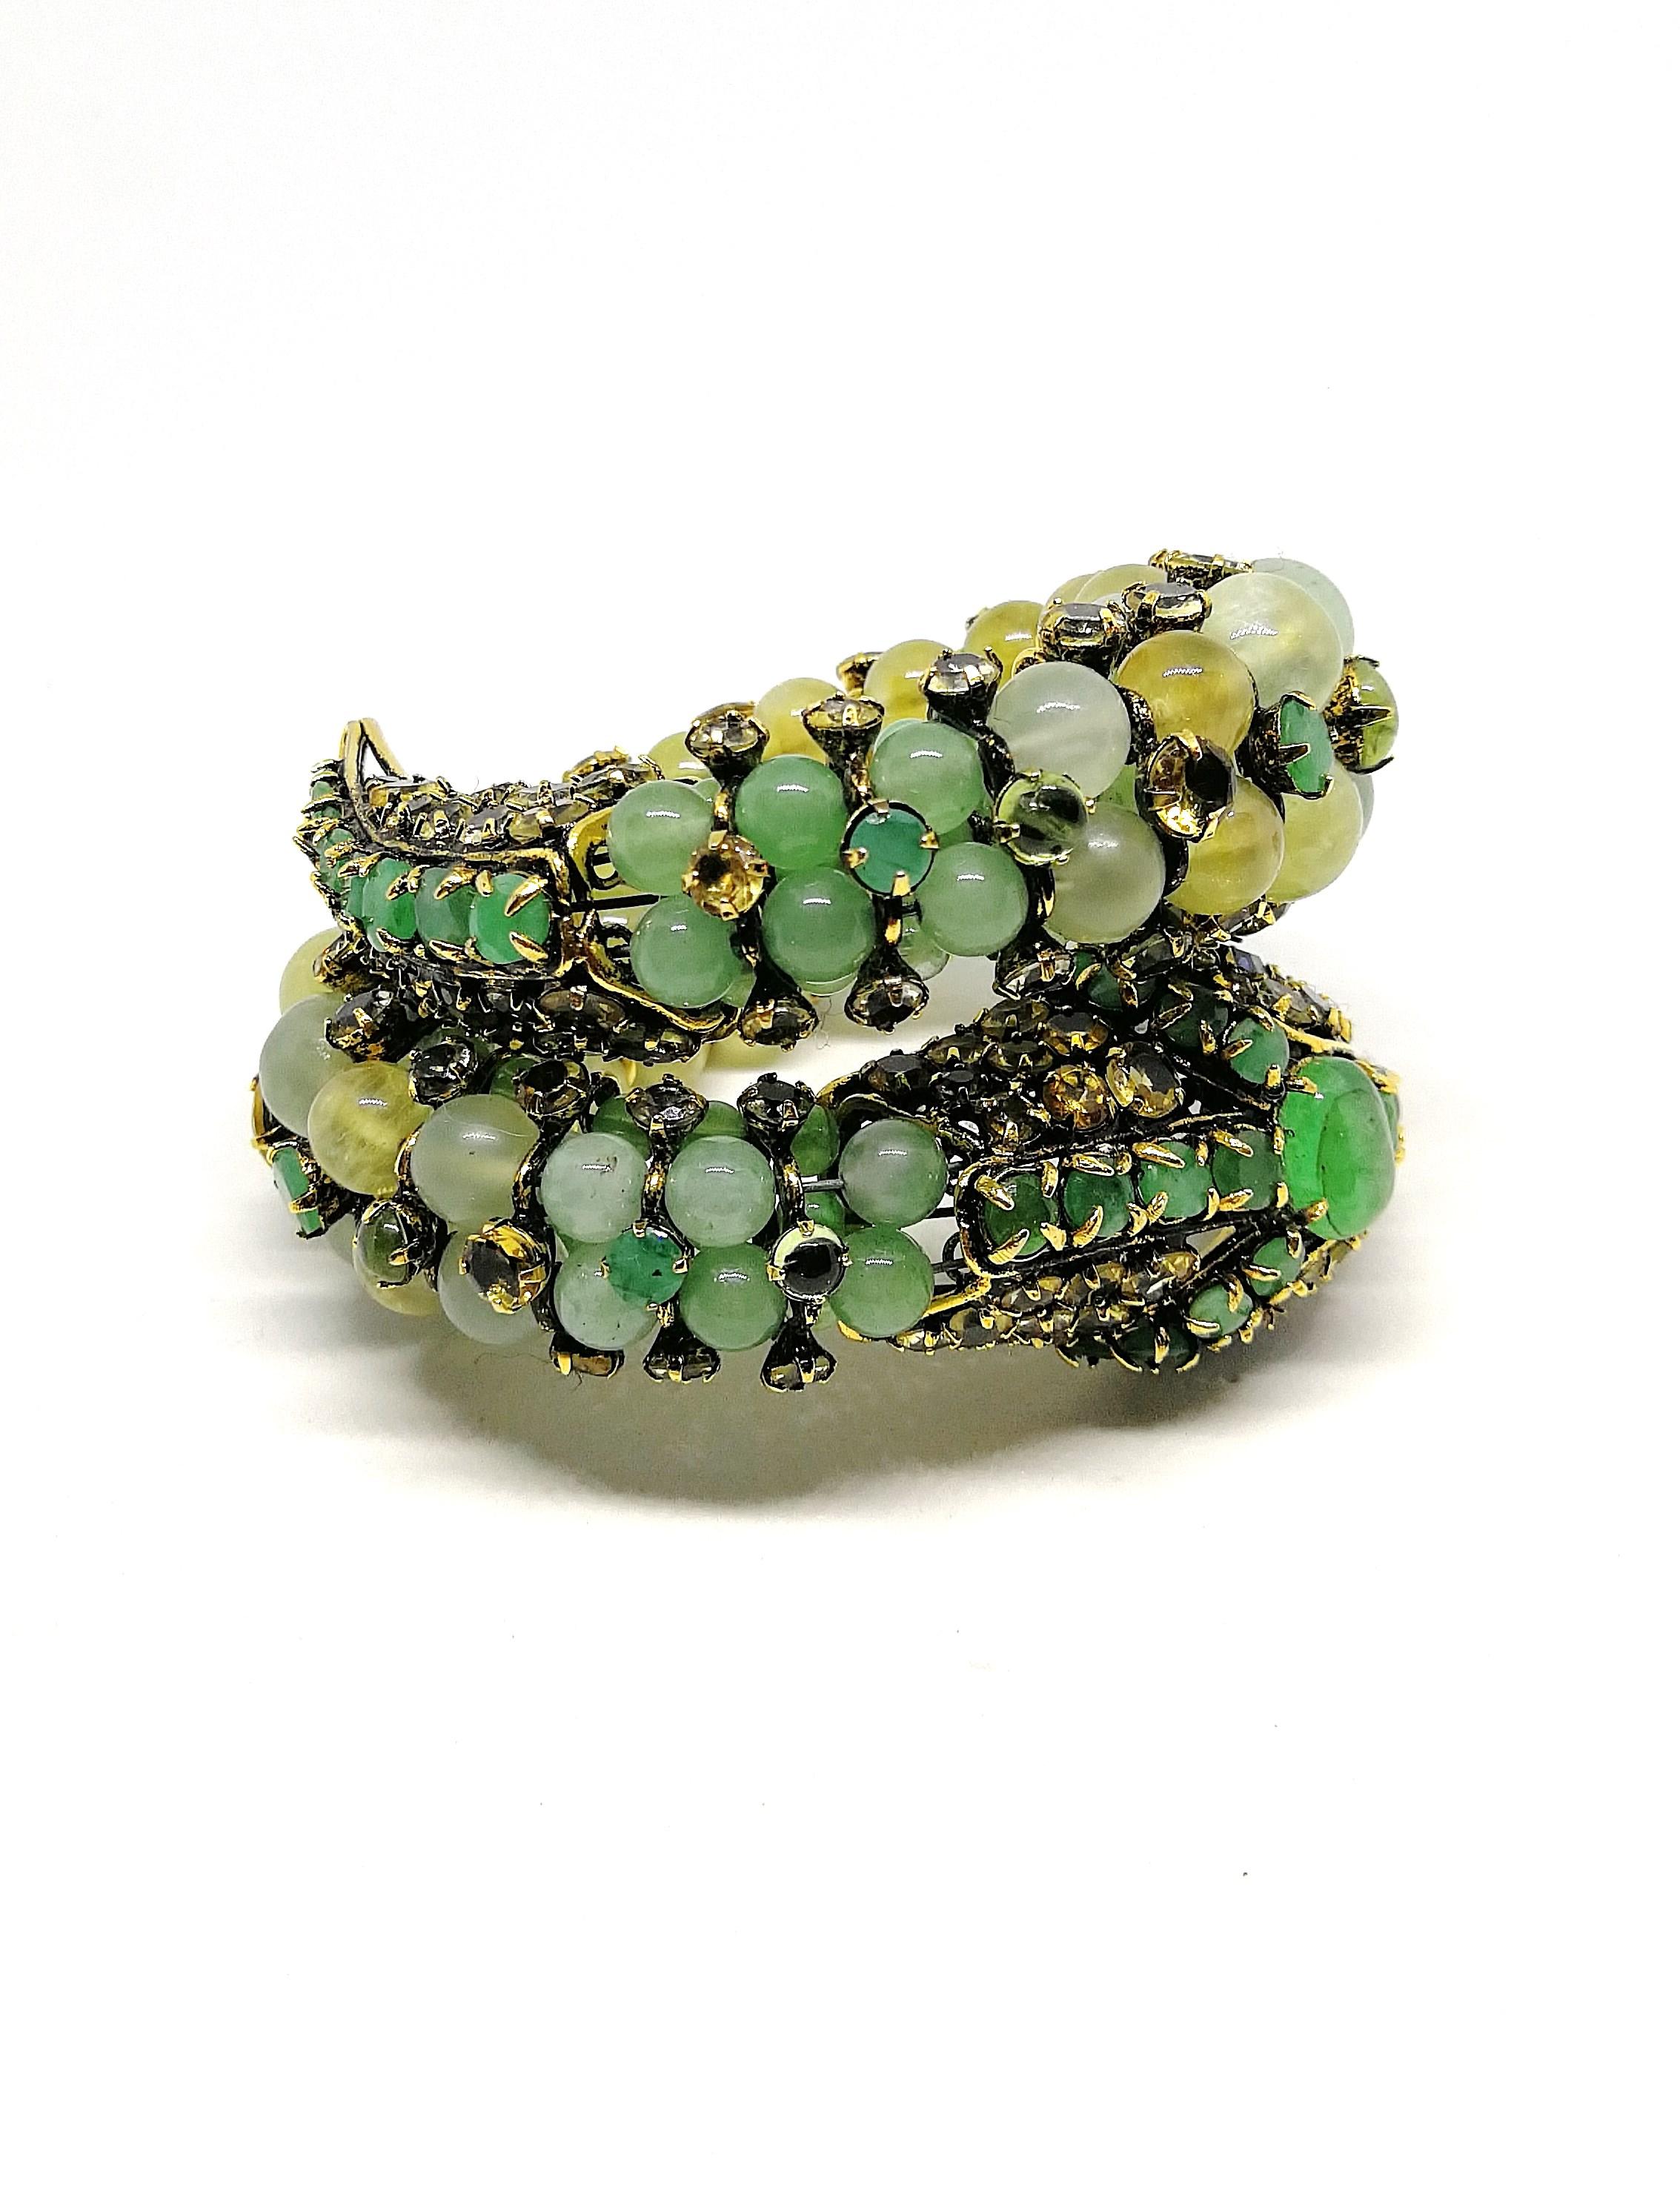 This is a true show stopper, a dynamic and vivid design! Hand made and hand wired, so well fitting and secure, this serpentine bracelet is made from emeralds and semi precious stones - peridot, citrine, aventurine, and bowenite - with sapphire paste